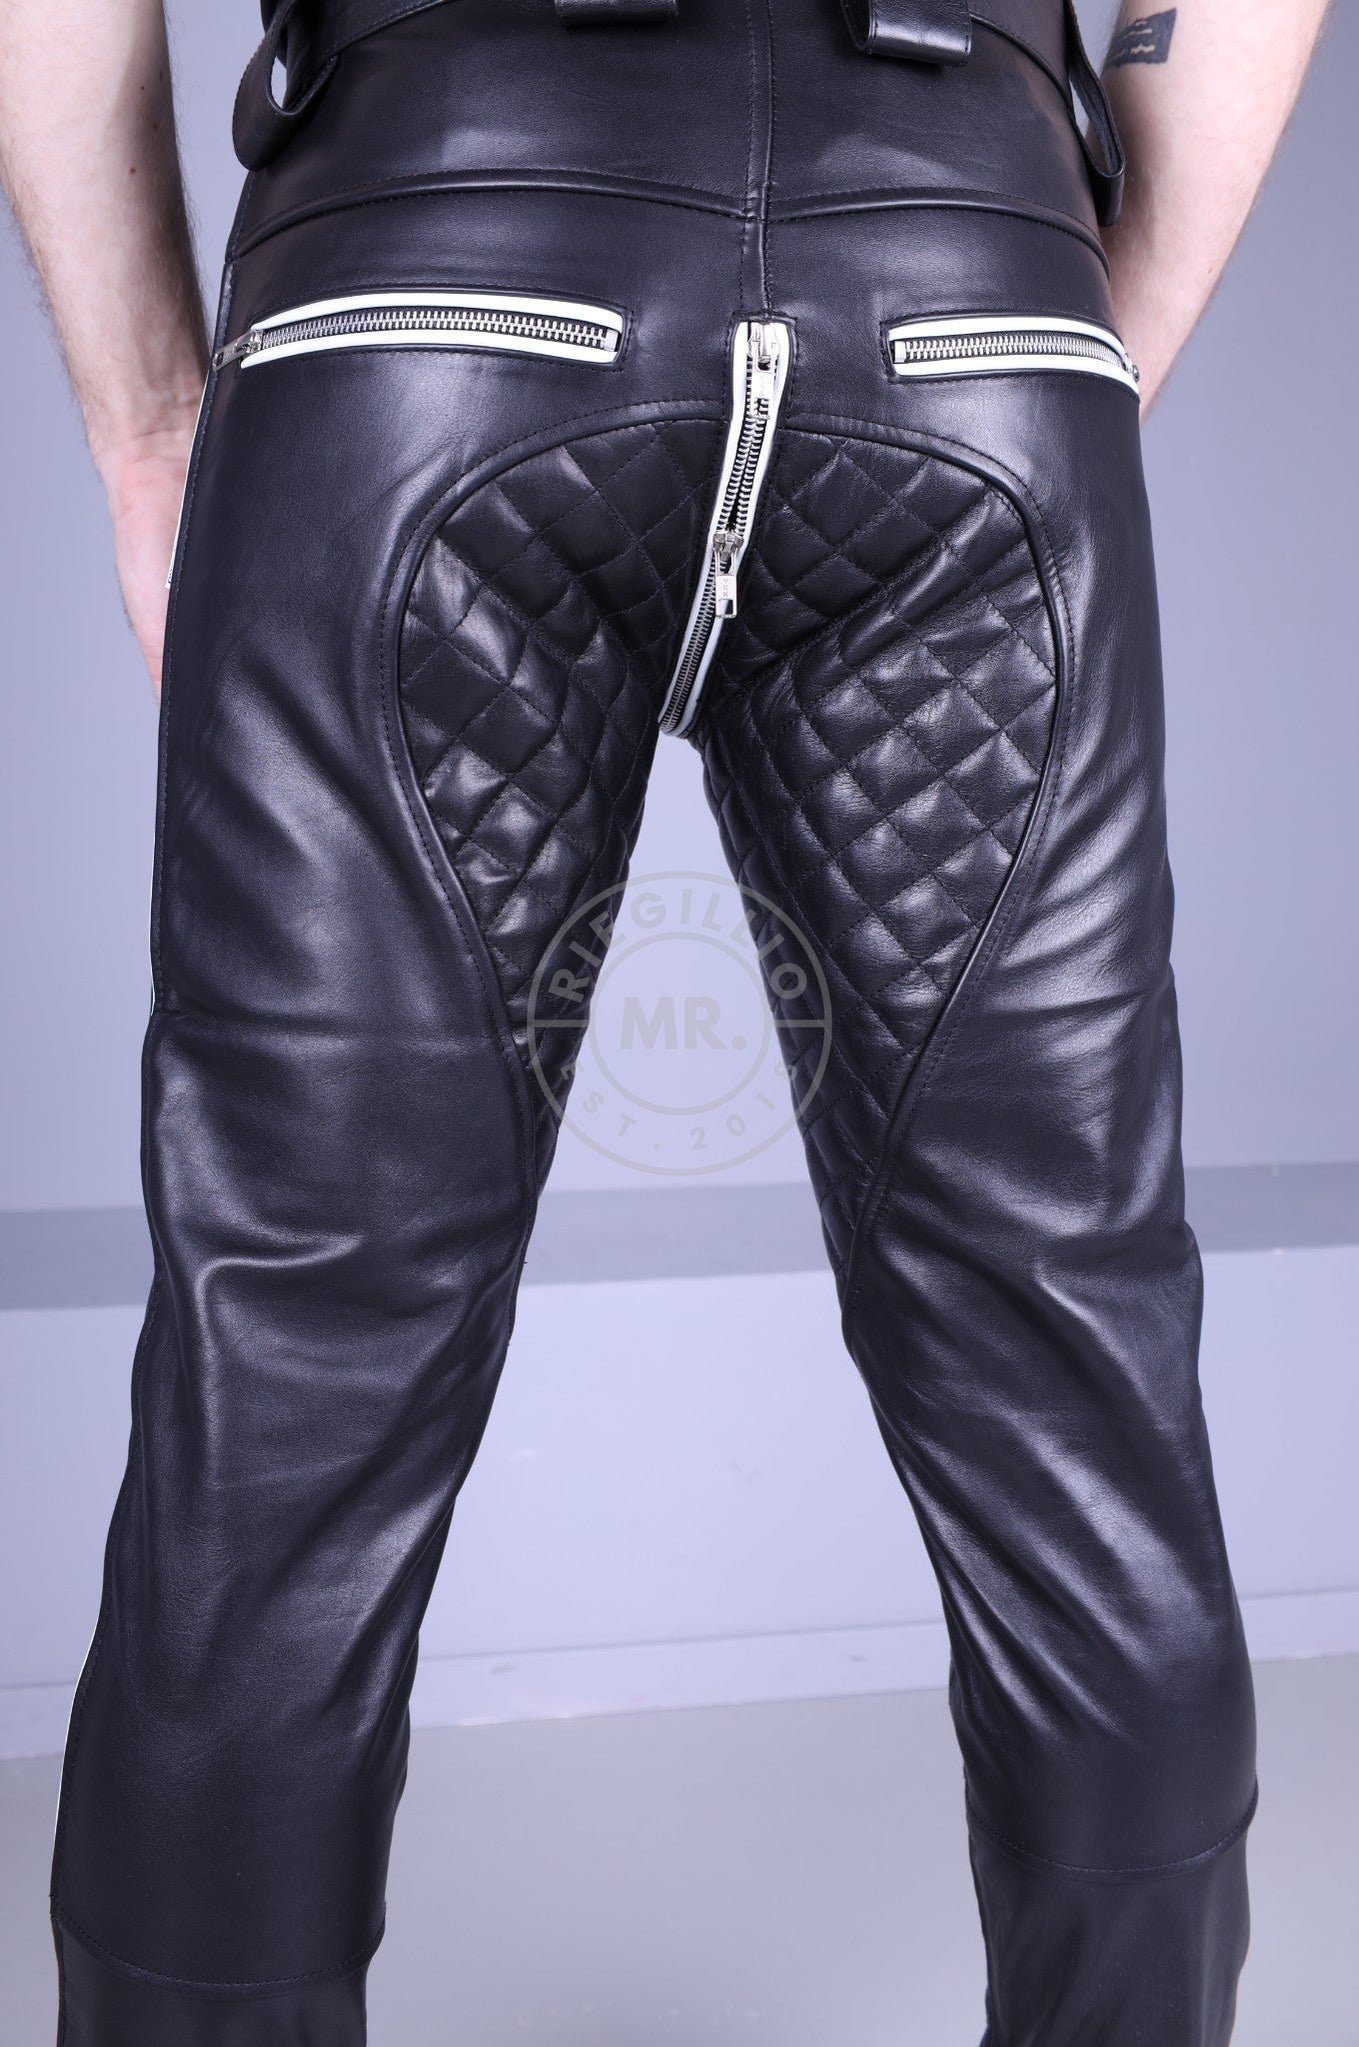 Padded Leather Pants - Black Piping by MR. Riegillo